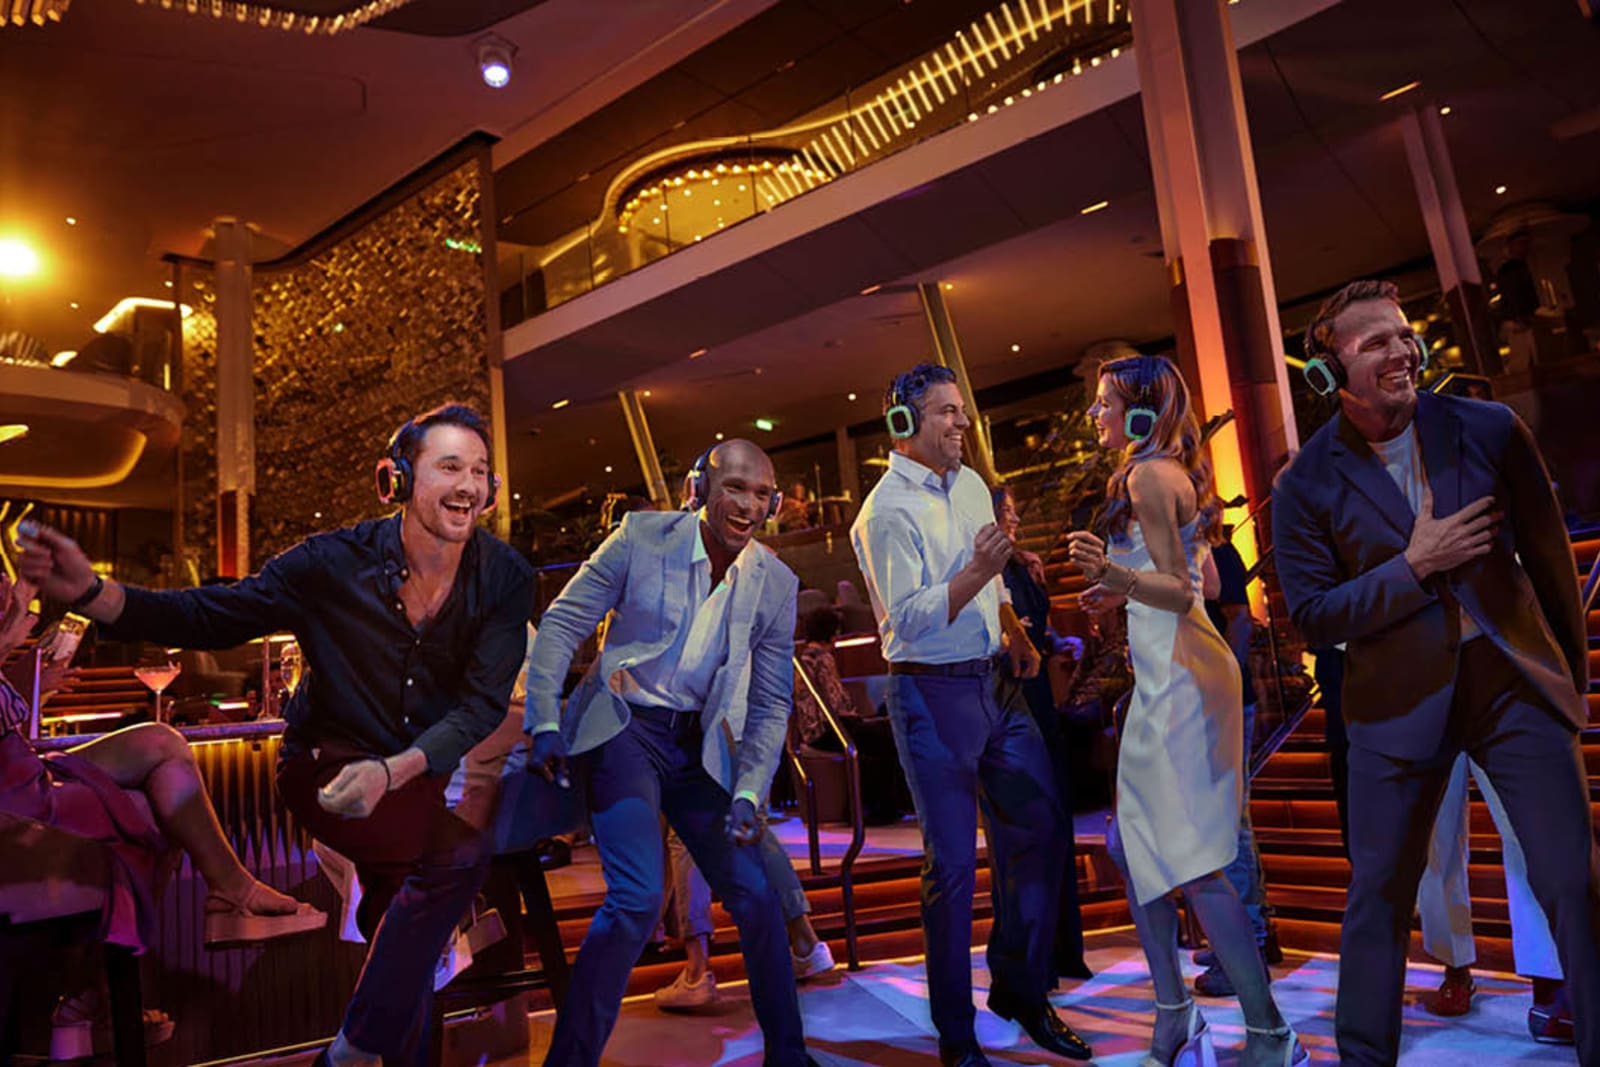 A group of people dancing at a silent disco aboard a cruise ship